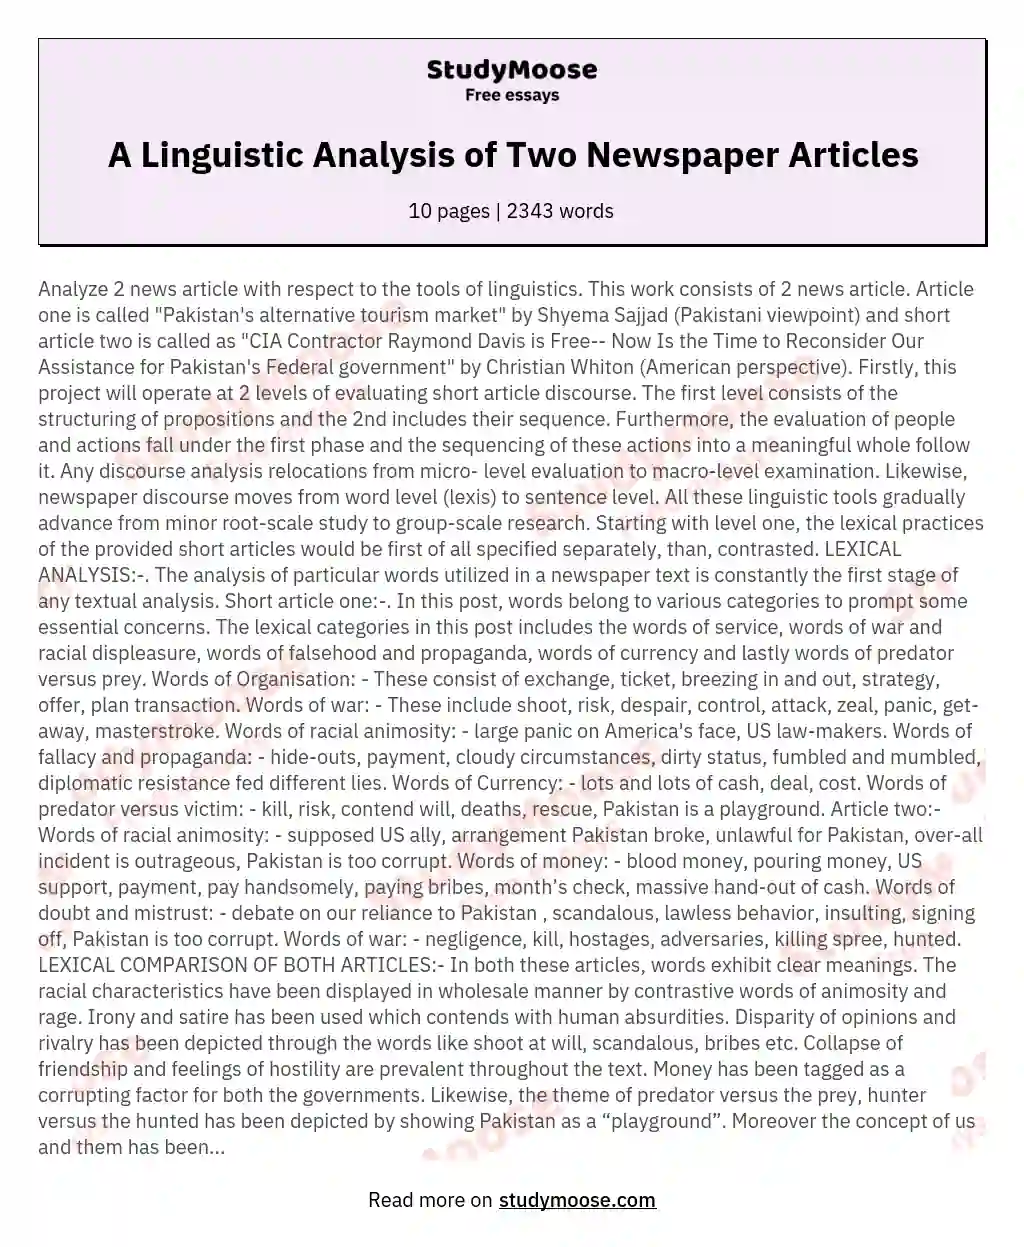 A Linguistic Analysis of Two Newspaper Articles